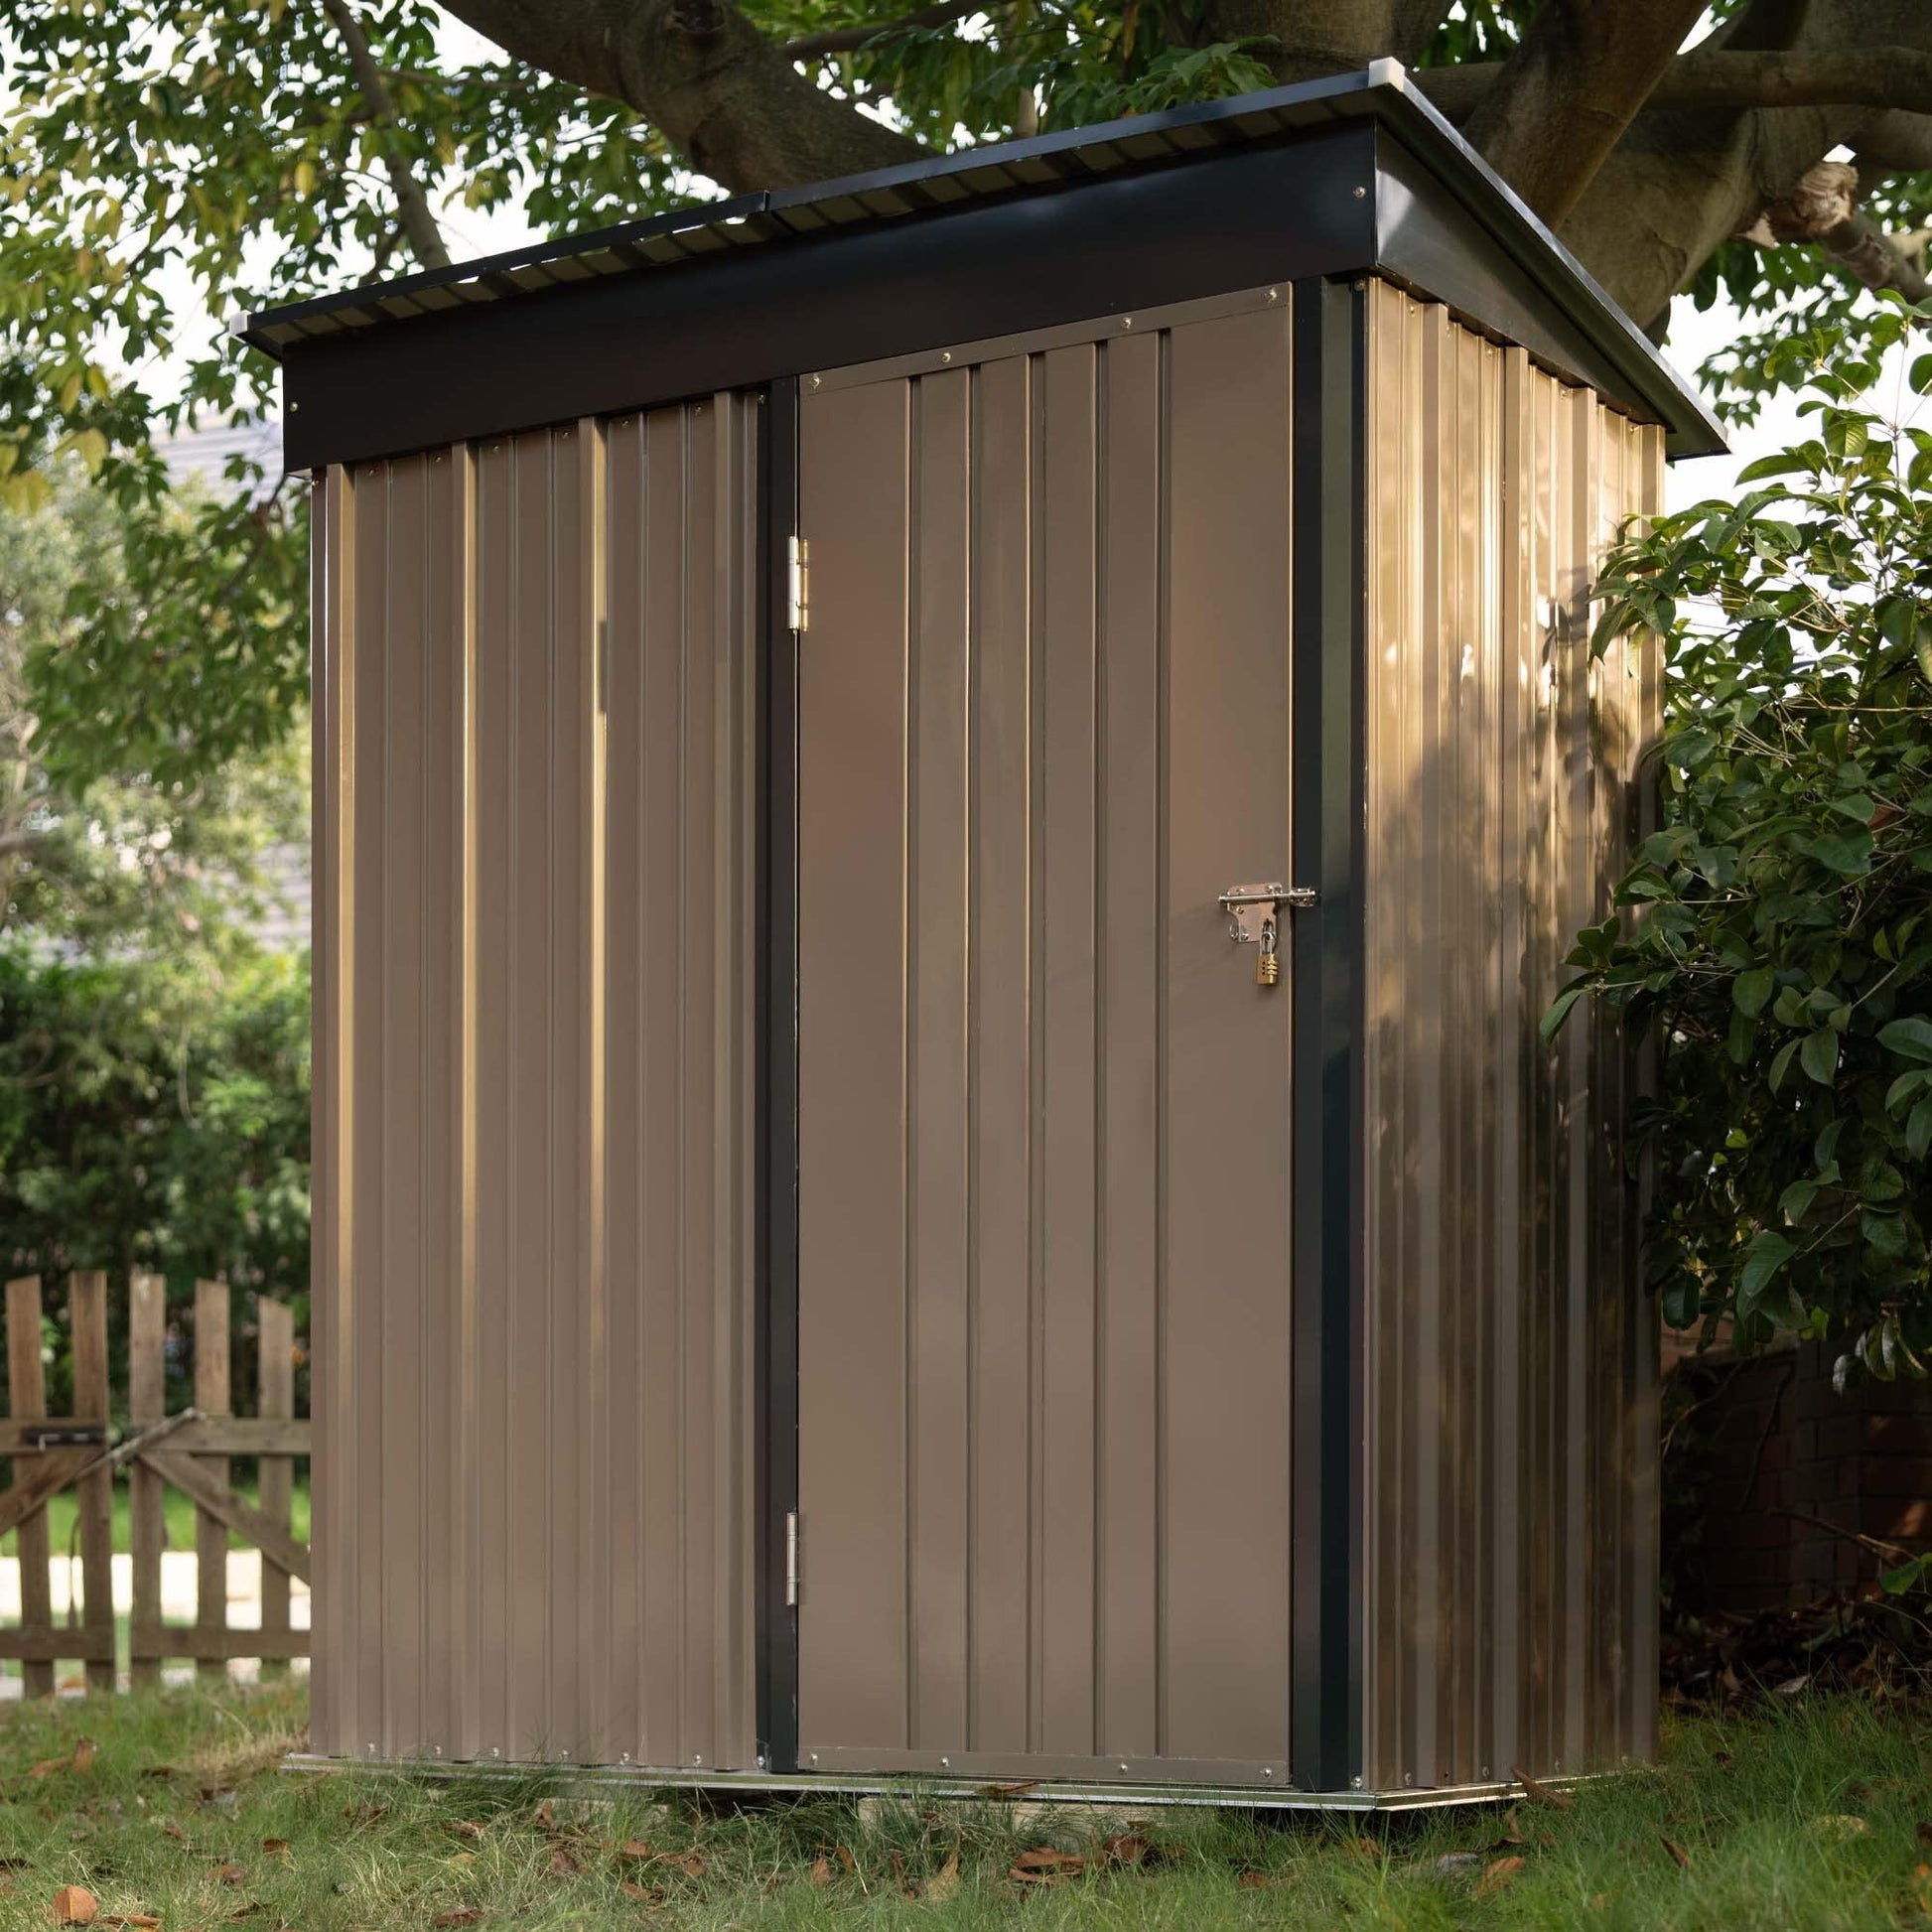 Devoko Outdoor Storage Shed 5 x 3 FT Lockable Metal Garden Shed Steel Anti-Corrosion Storage House with Single Lockable Door for Backyard Outdoor Patio (Brown) - CookCave